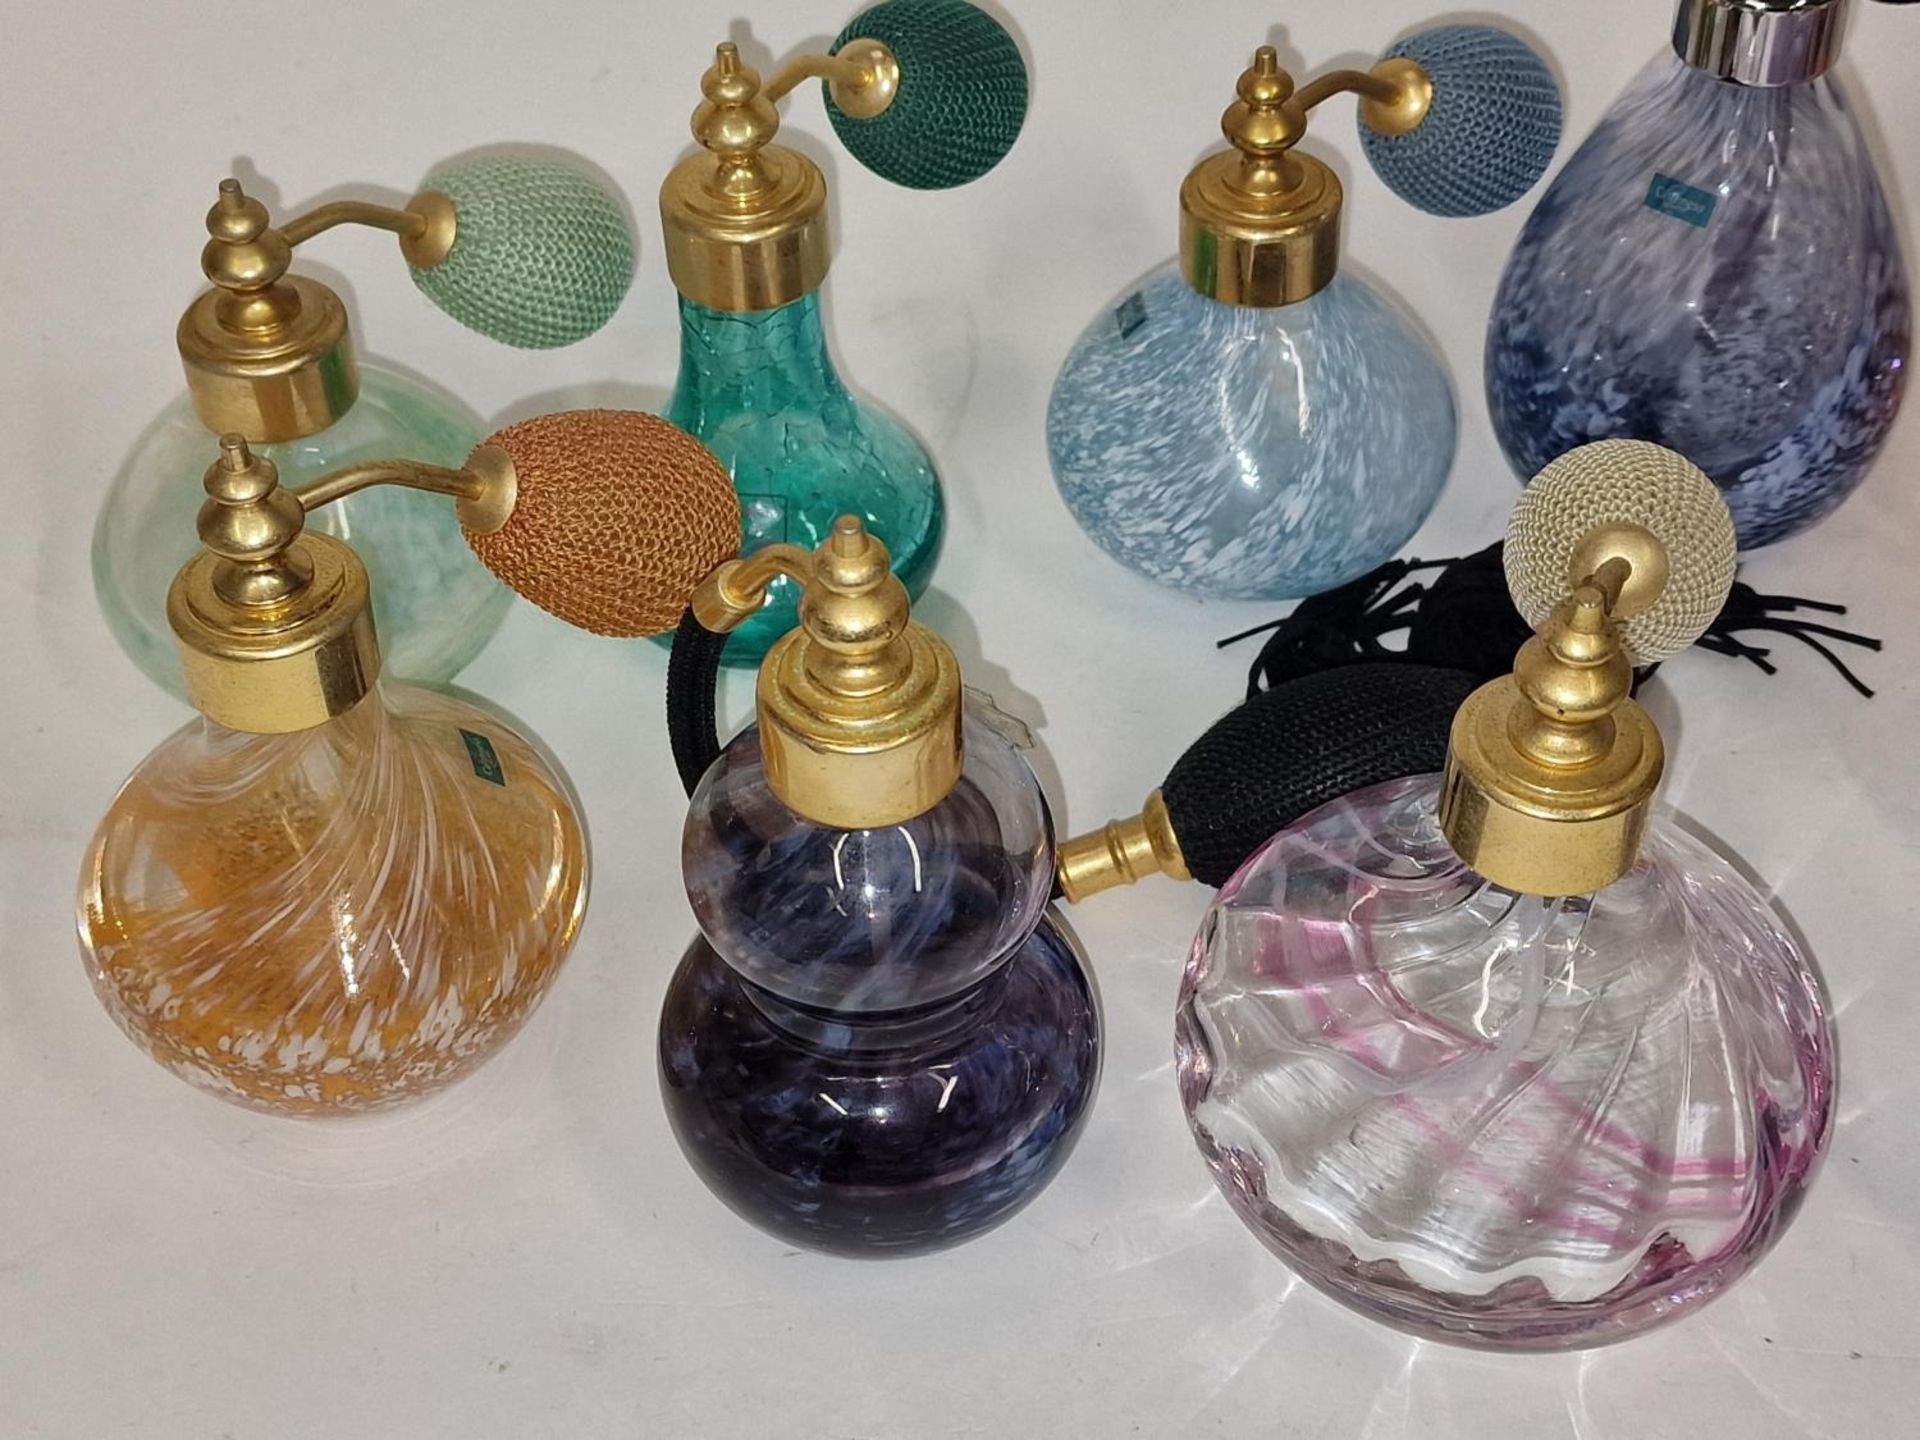 Caithness collection of glass perfume atomiser bottles many still with Caithness stickers - Image 2 of 4